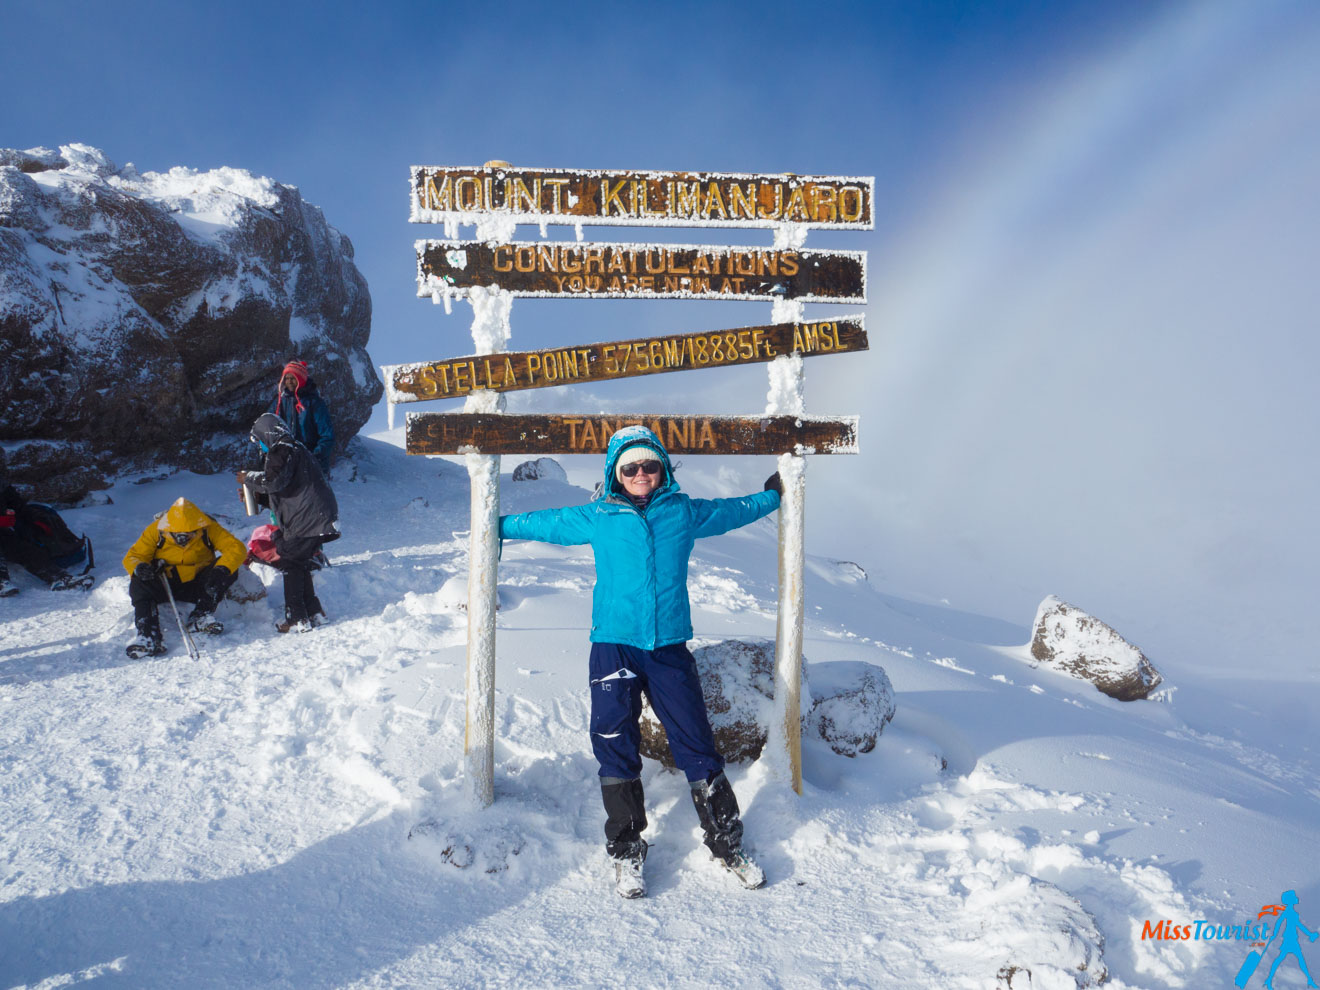 Climbing Kilimanjaro – 7 Things You Should Know Before You Go 38